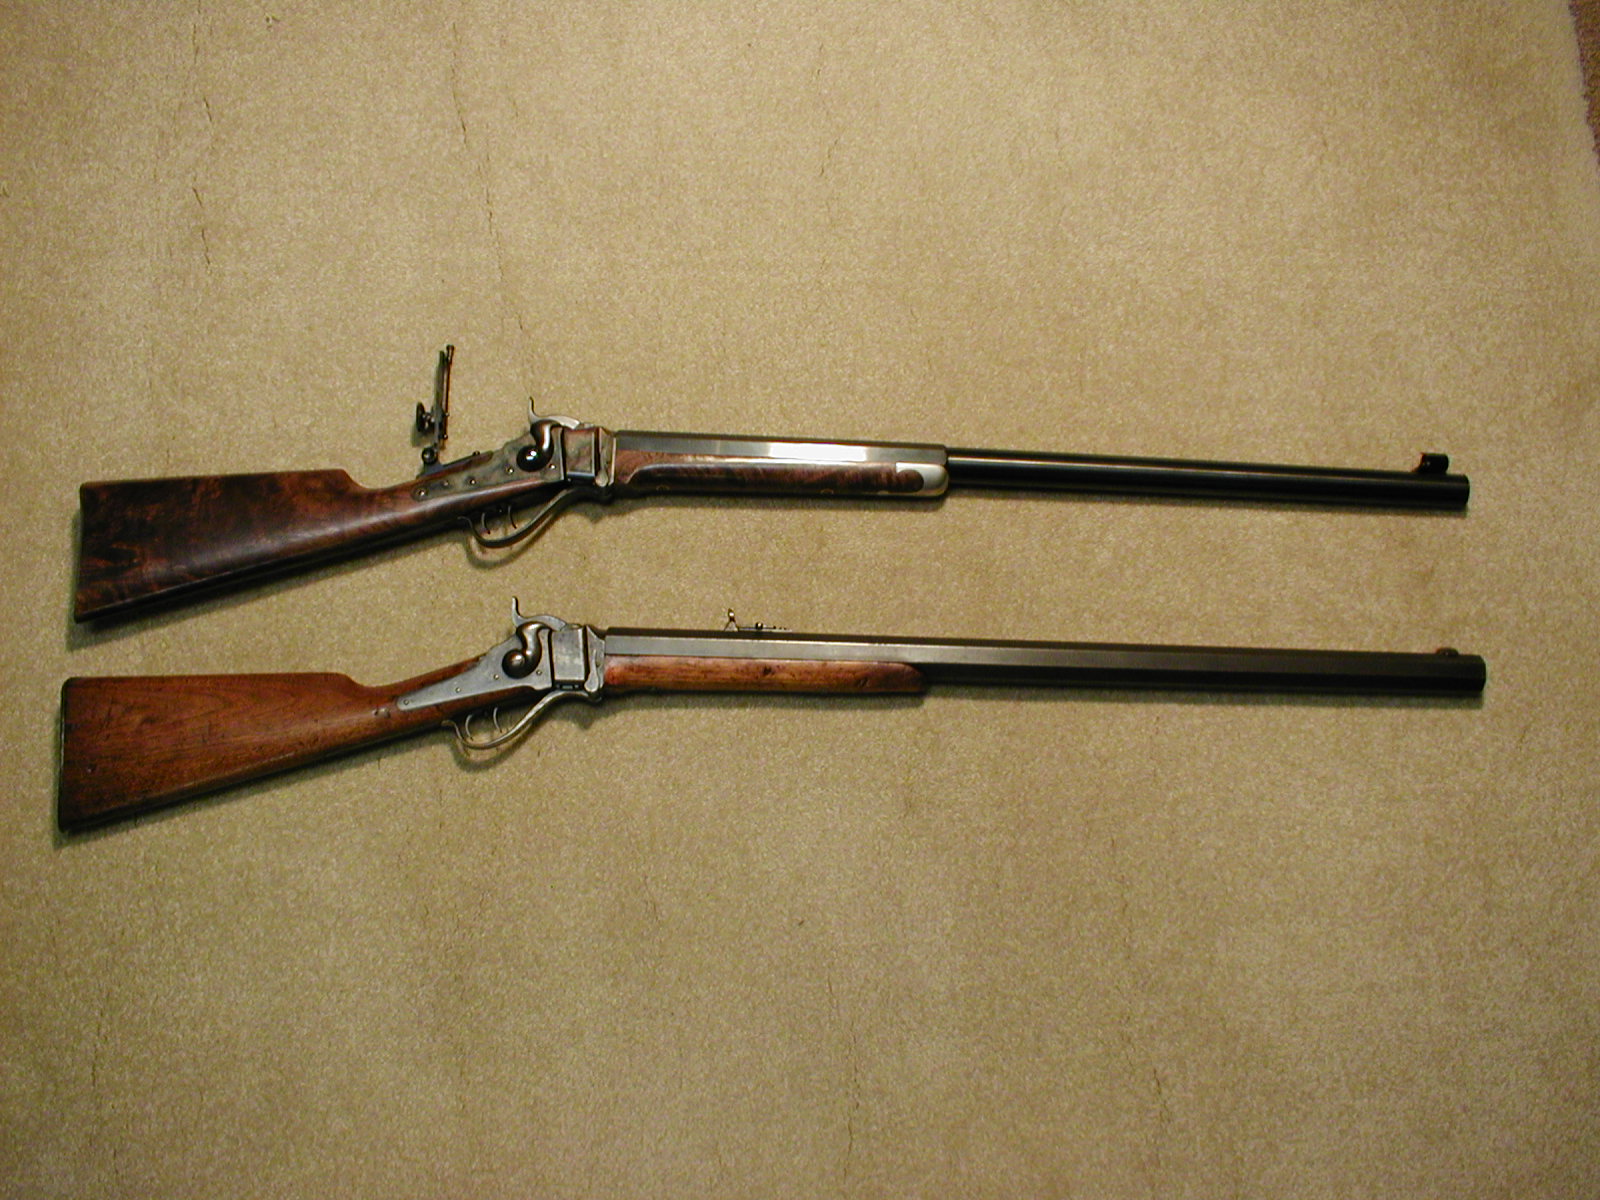 Sharps 1863 Rifle Pics, Weapons Collection